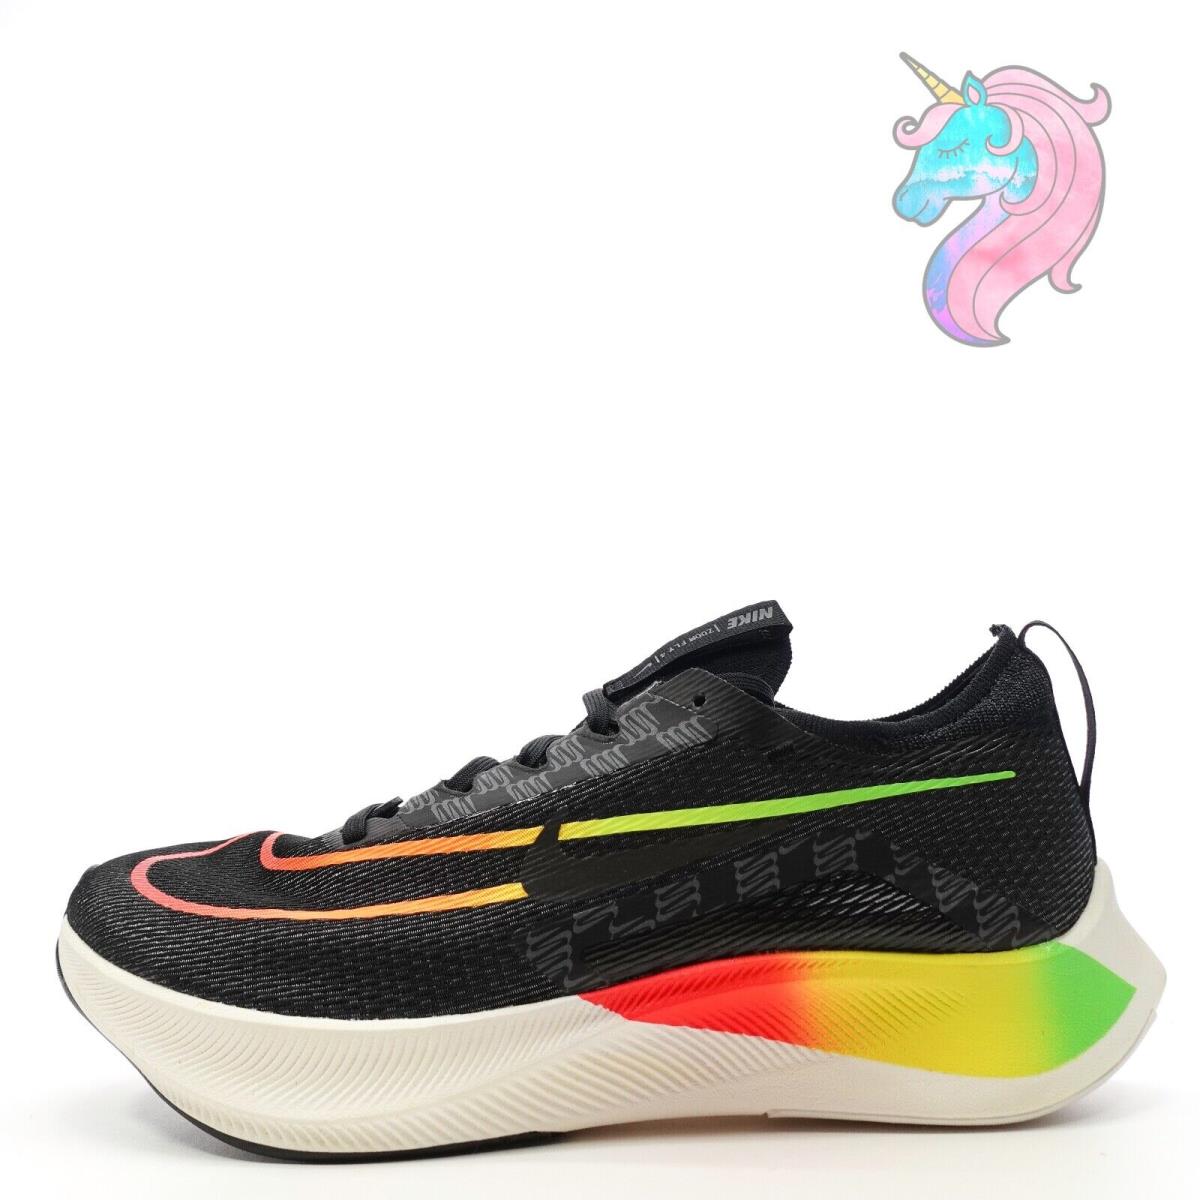 Nike shoes Zoom Fly - Black, Red, Yellow, Green 2